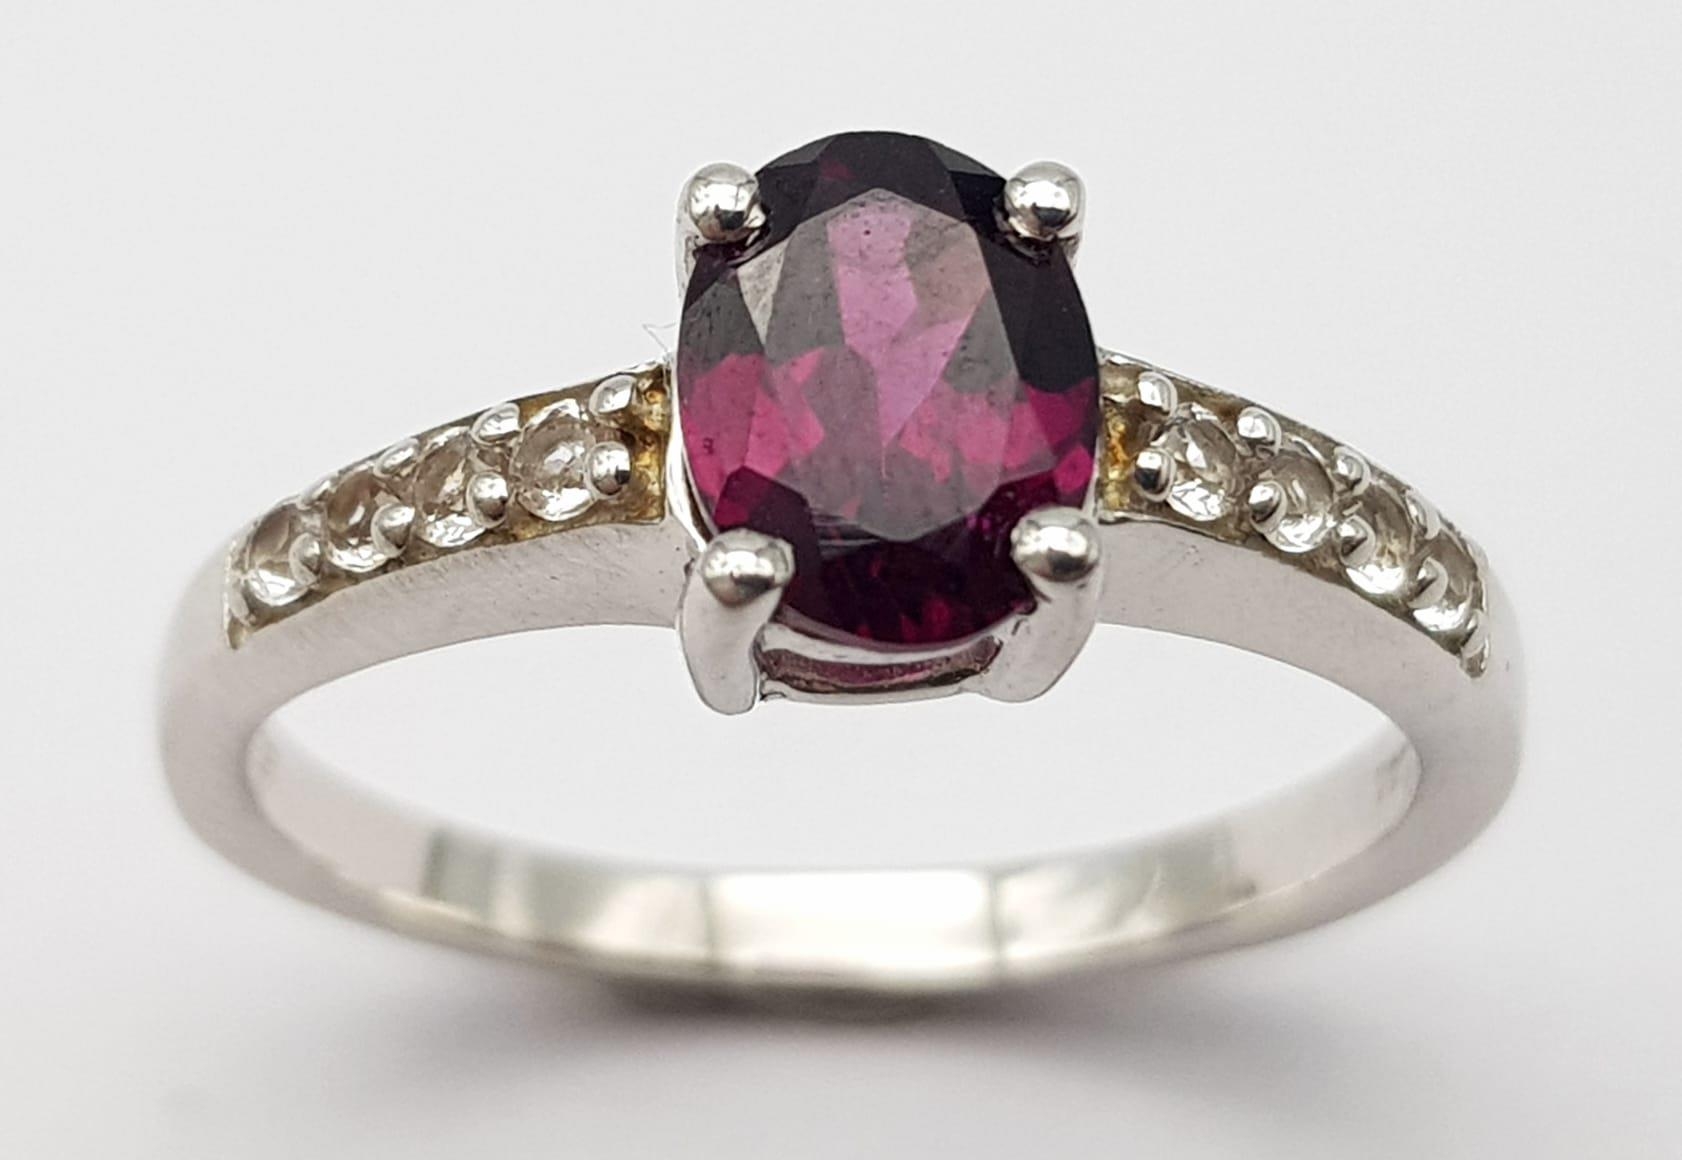 Three 925 Sterling Silver Gemstone Rings: Garnet - Size R, Amethyst - Size P and Emerald - Size P. - Image 8 of 13